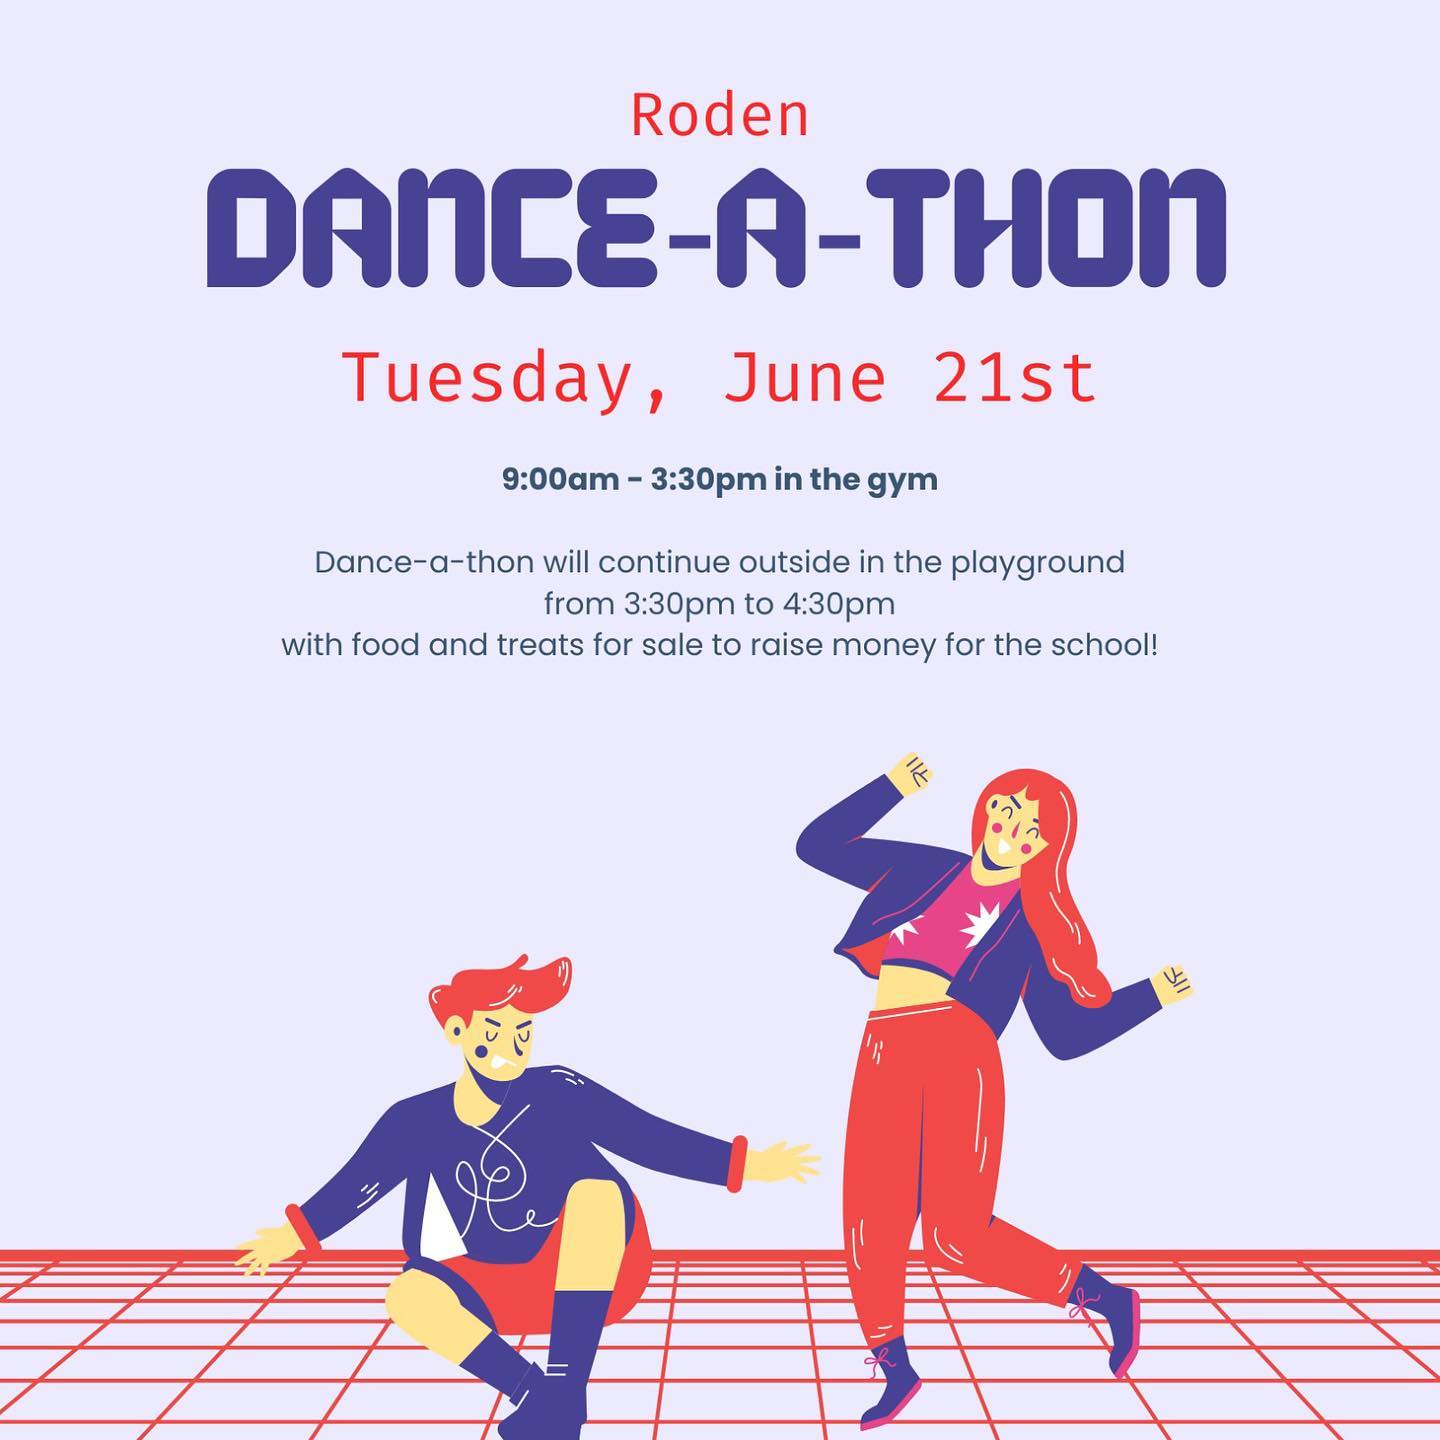 Did you know? Next Tuesday is the all-day Roden Dance-a-Thon!  And Roden School Council is taking the event out of the gym and onto the schoolyard from 3:30 to 4:30 p.m., with music, snacks, and pizza for sale. It’s been a rollercoaster of a year and it is time to celebrate. Mark your calendars — we hope to see you ALL!